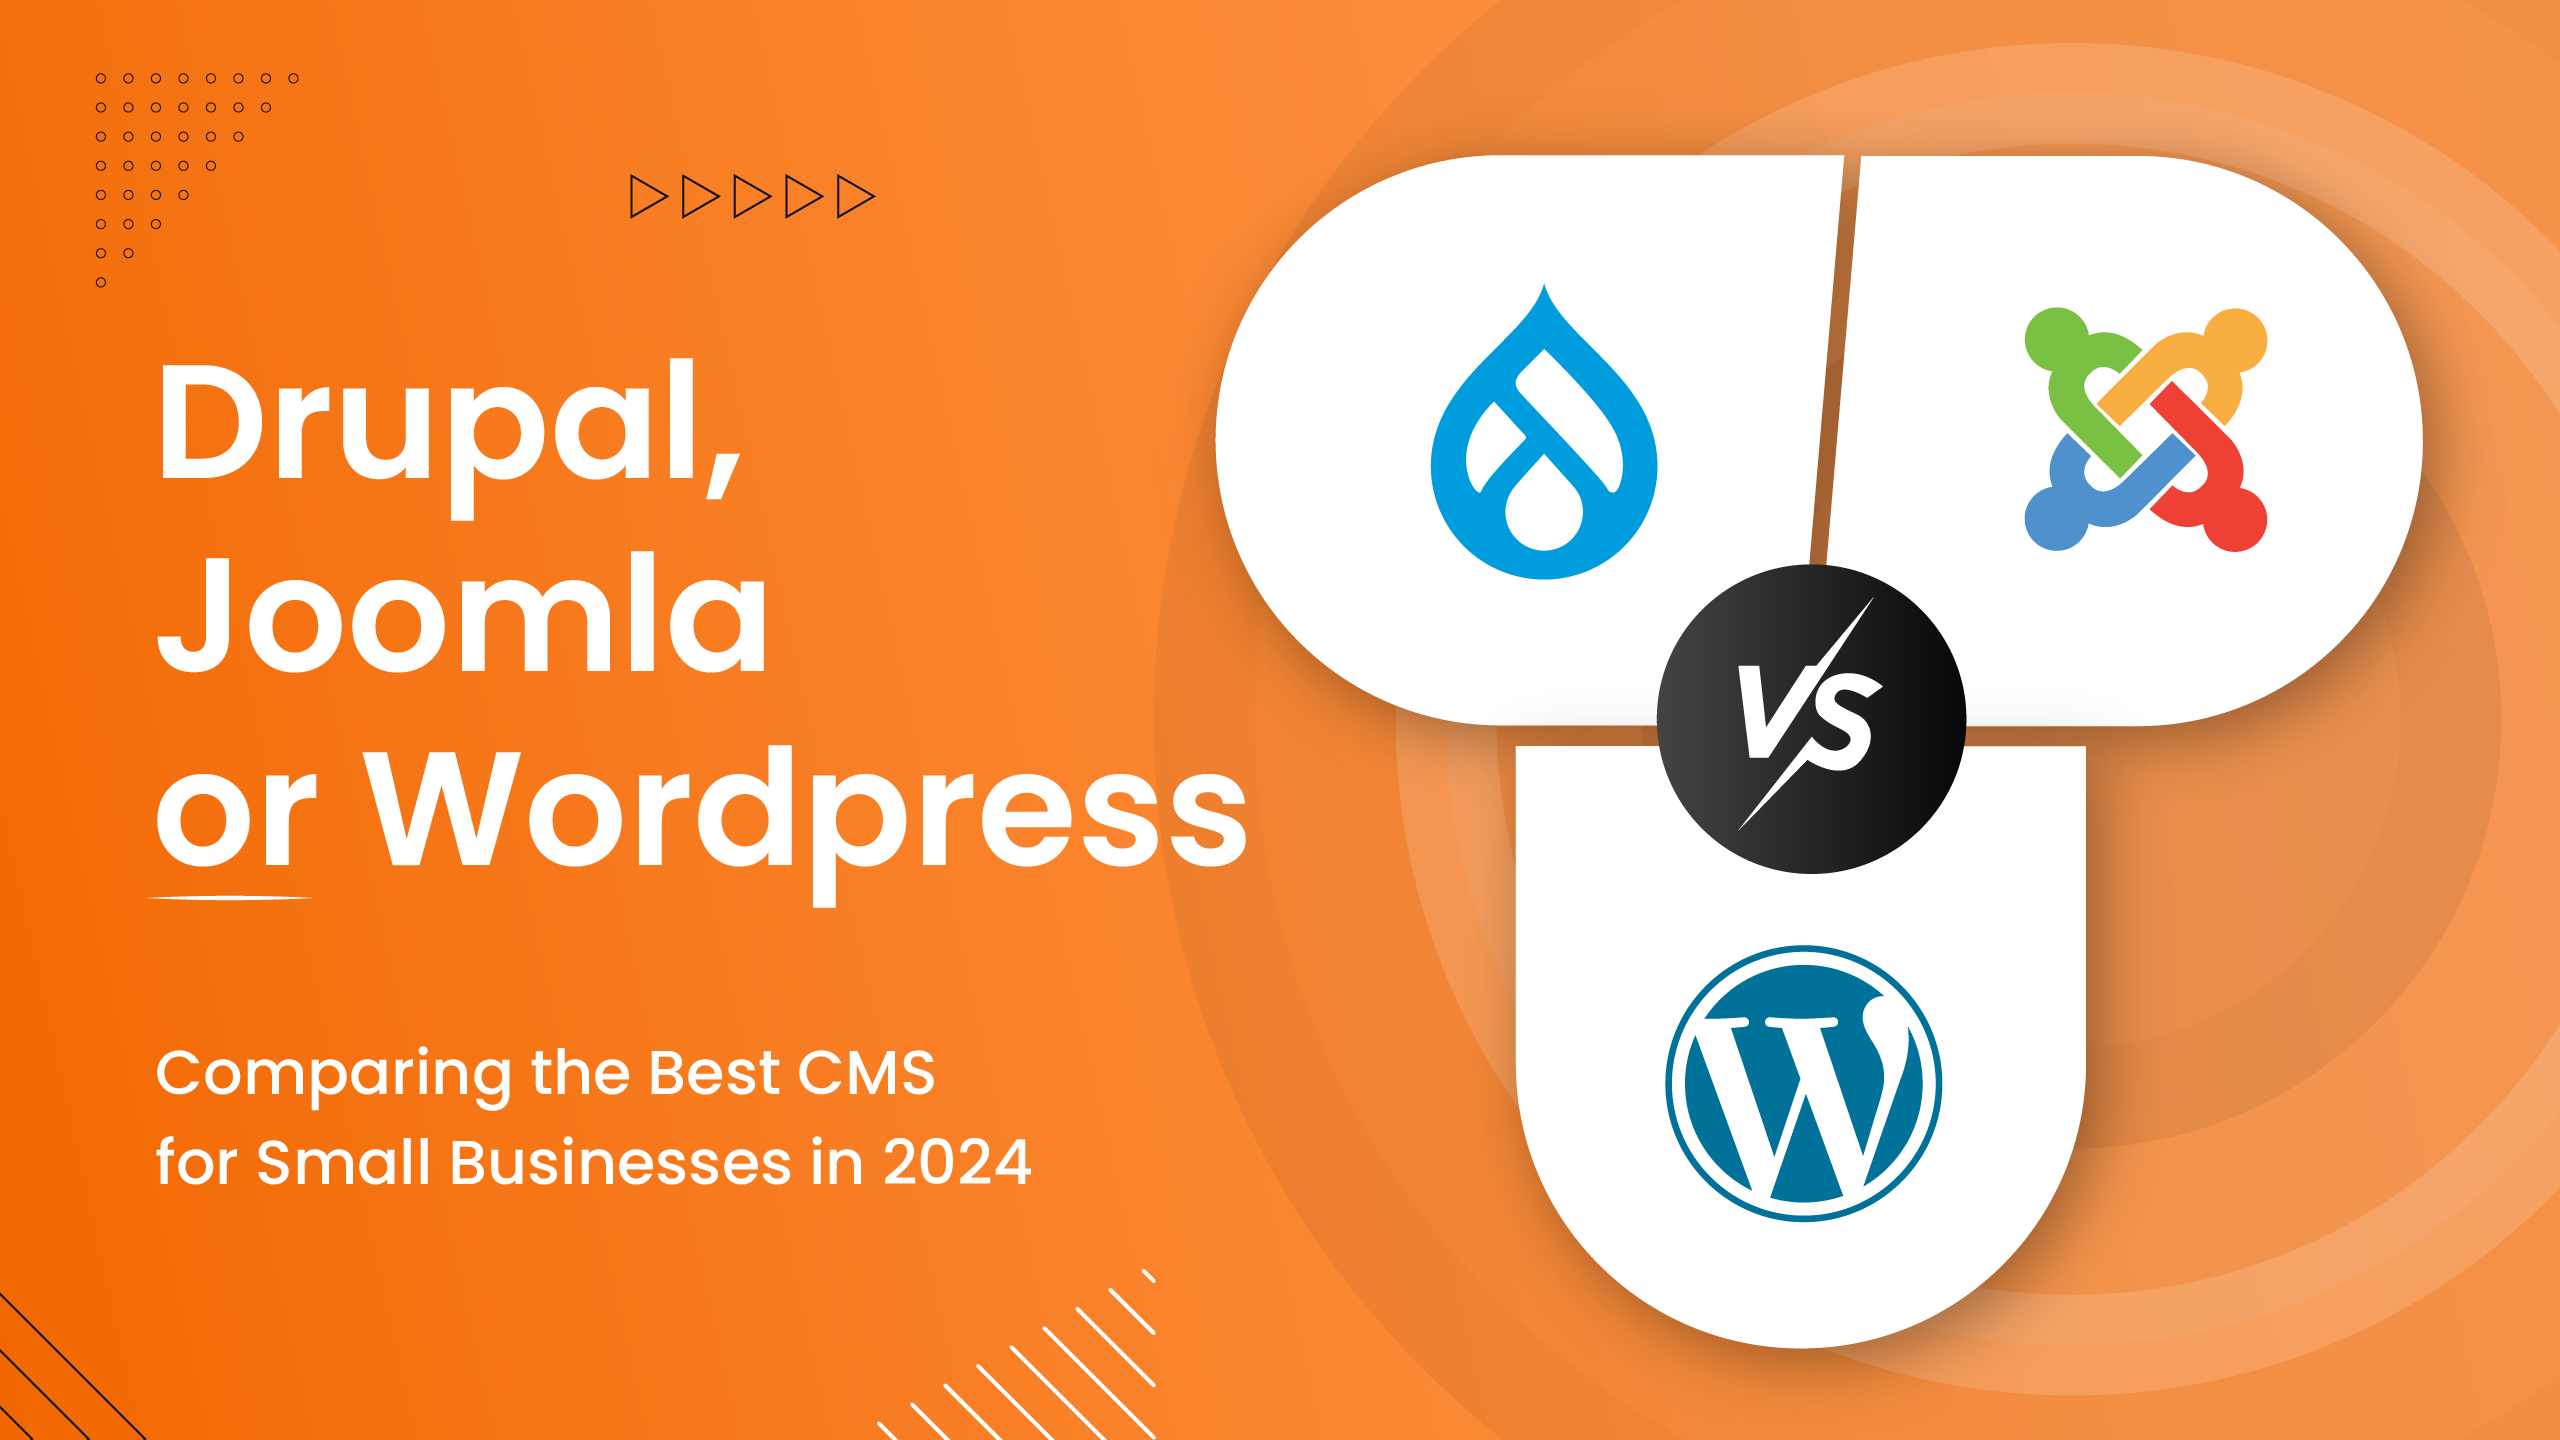 Drupal, Joomla or WordPress: Comparing the Best CMS for Small Businesses in 2024